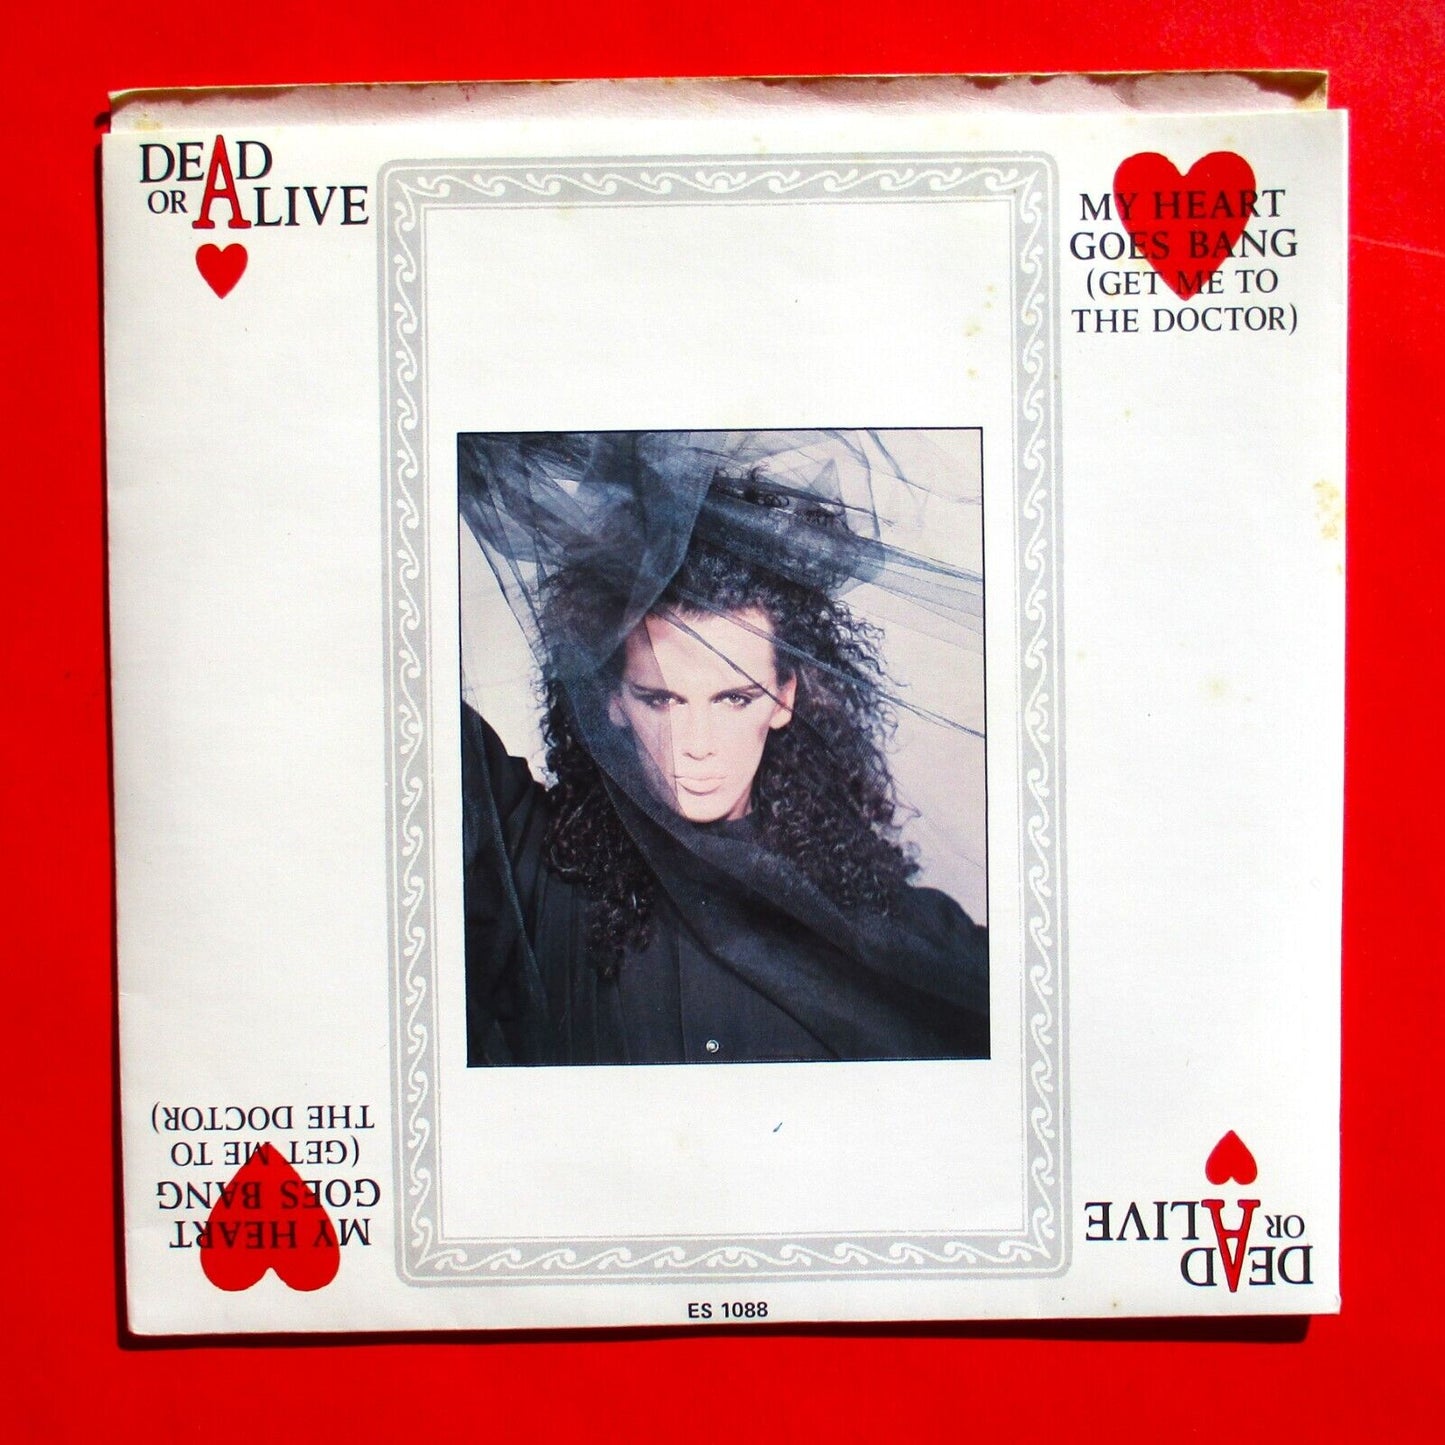 Dead Or Alive ‎My Heart Goes Bang (Get Me To The Doctor) 7" Vinyl Single 1985